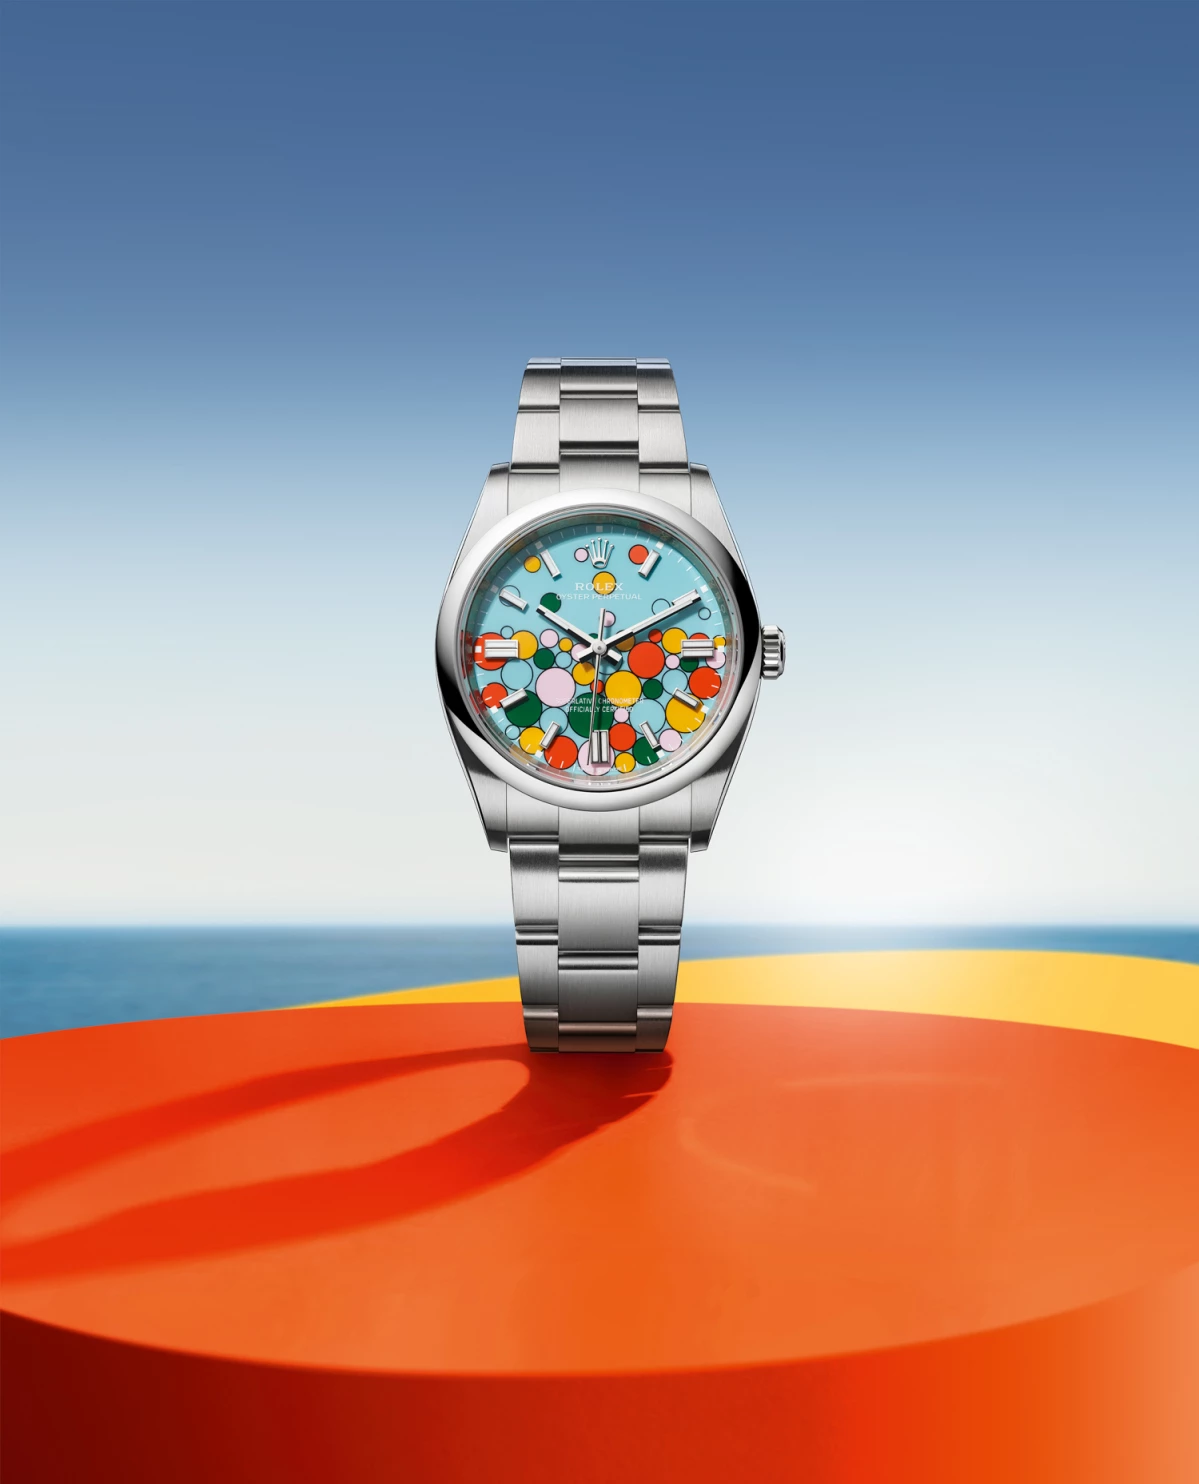 The New Rolex Oyster Perpetual